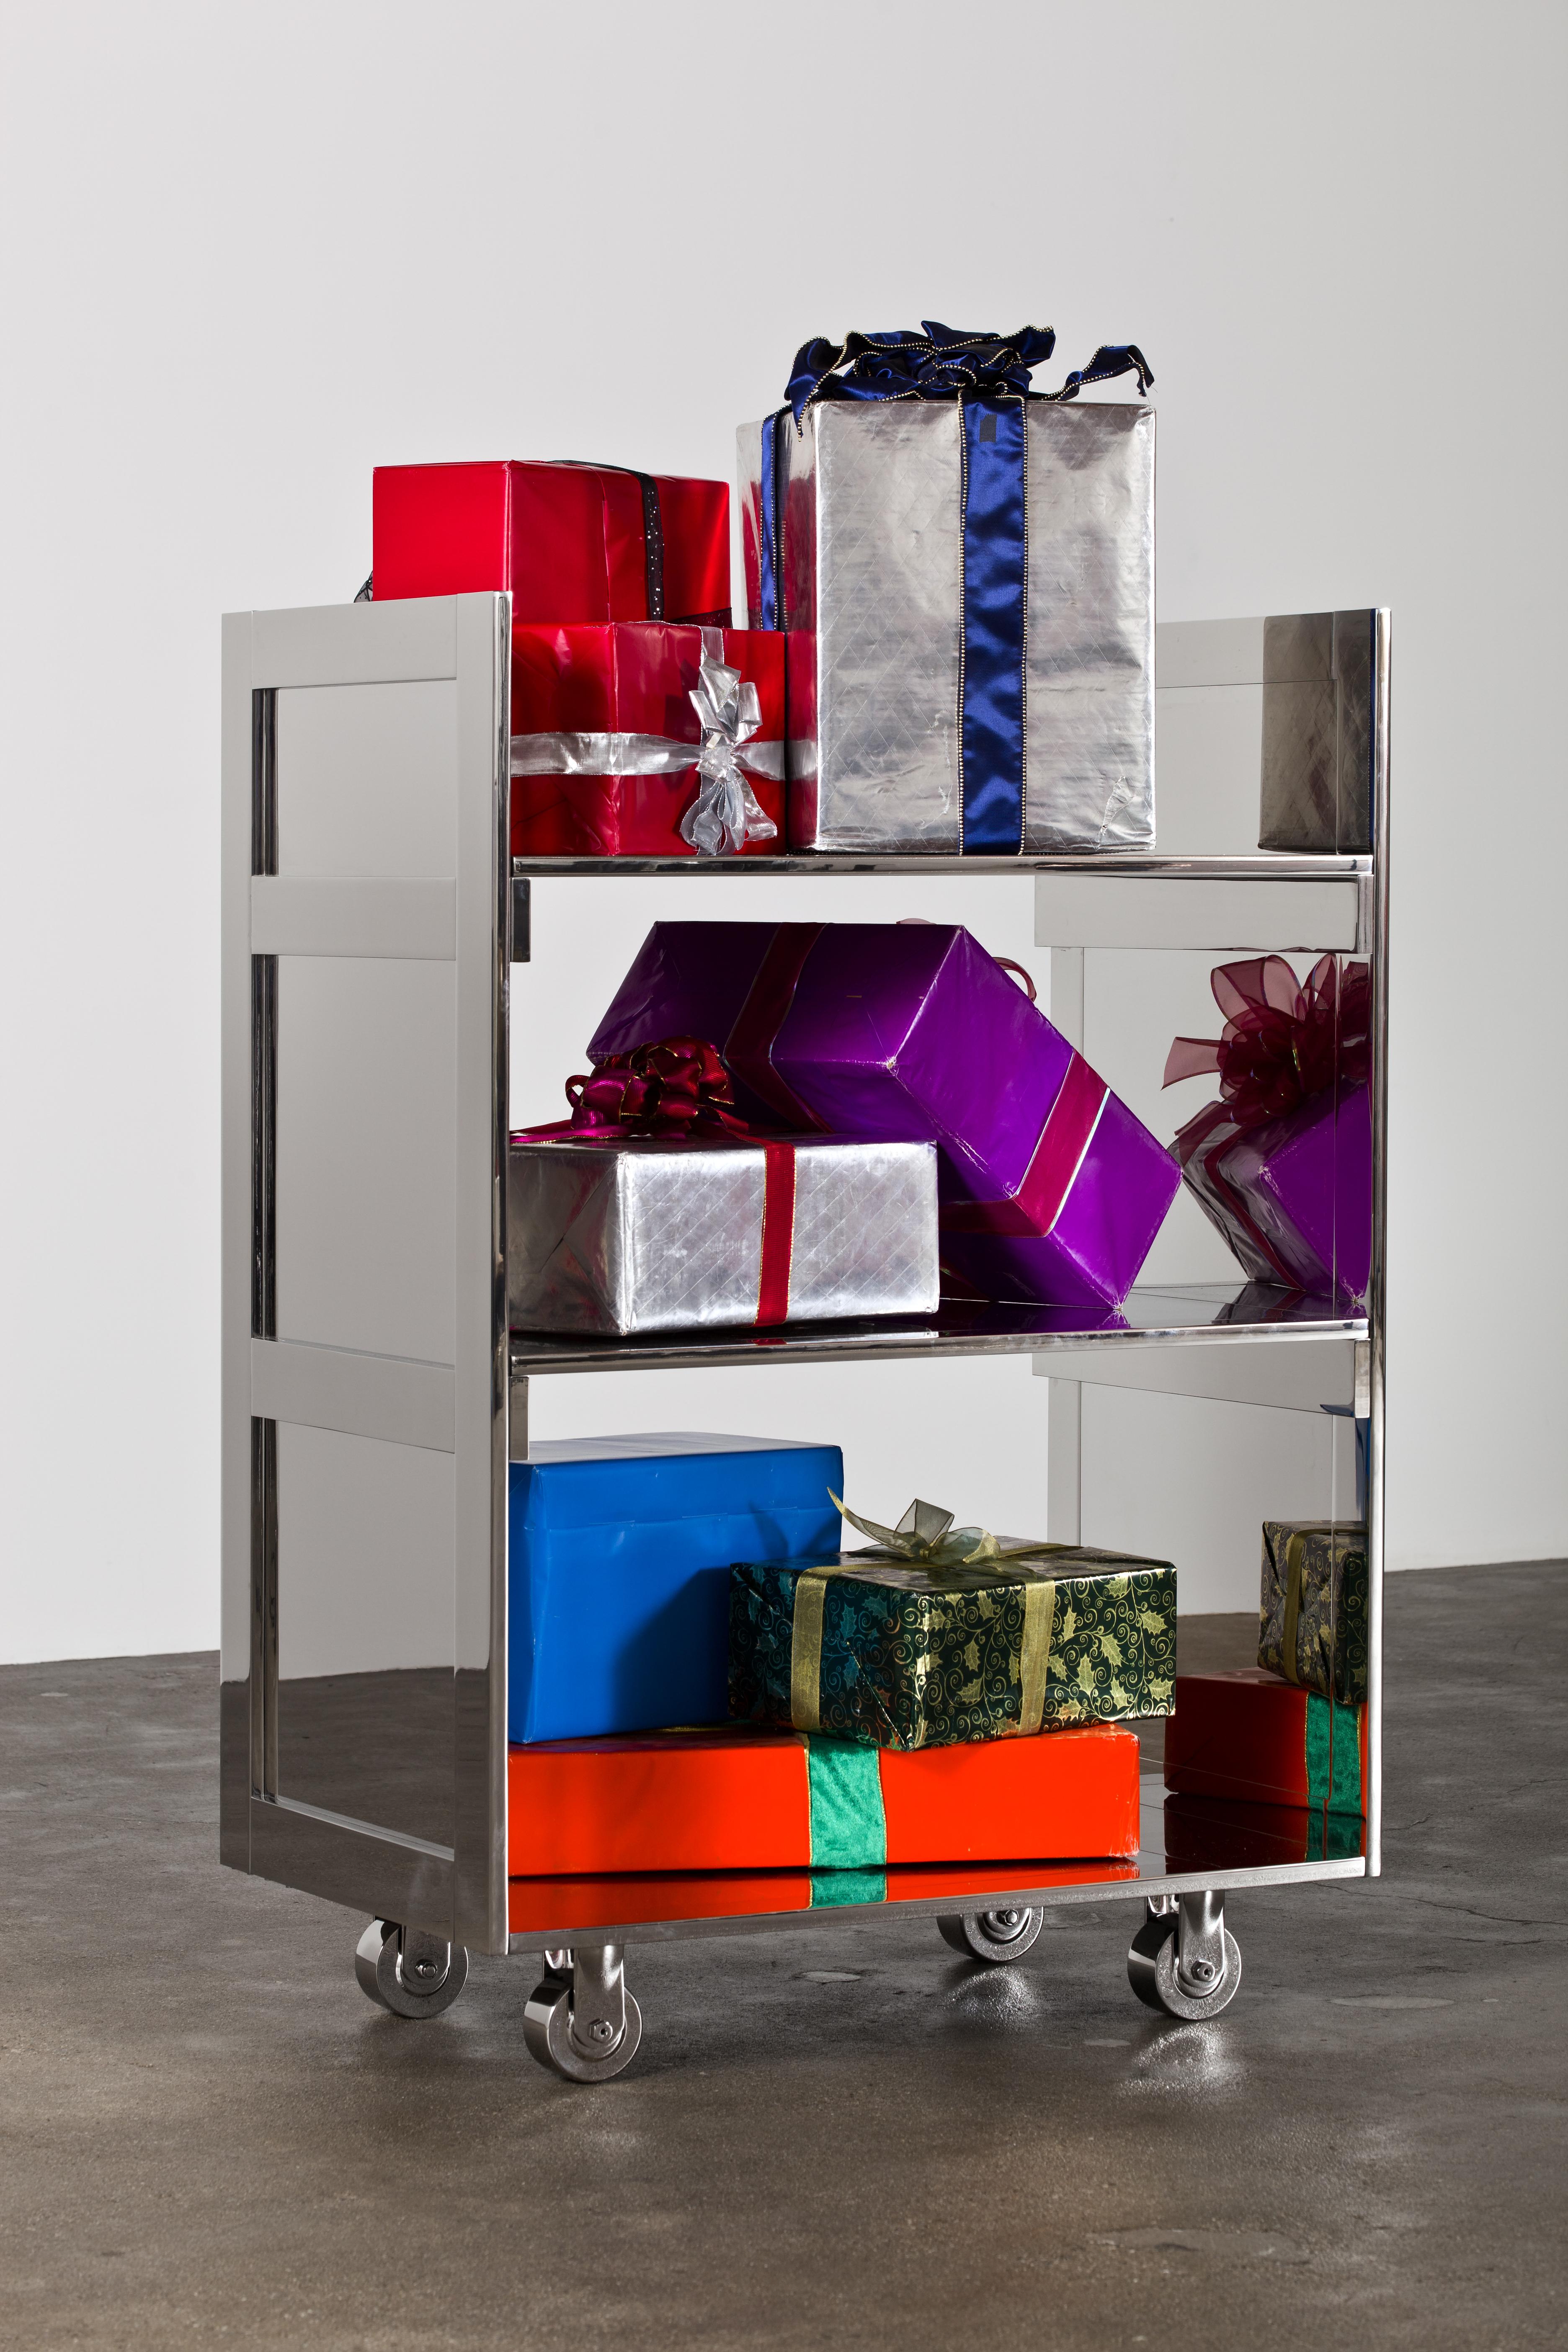 A chrome metal cart with three shelves holds boxes gift wrapped in colorful, shiny paper and ribbons with bows.